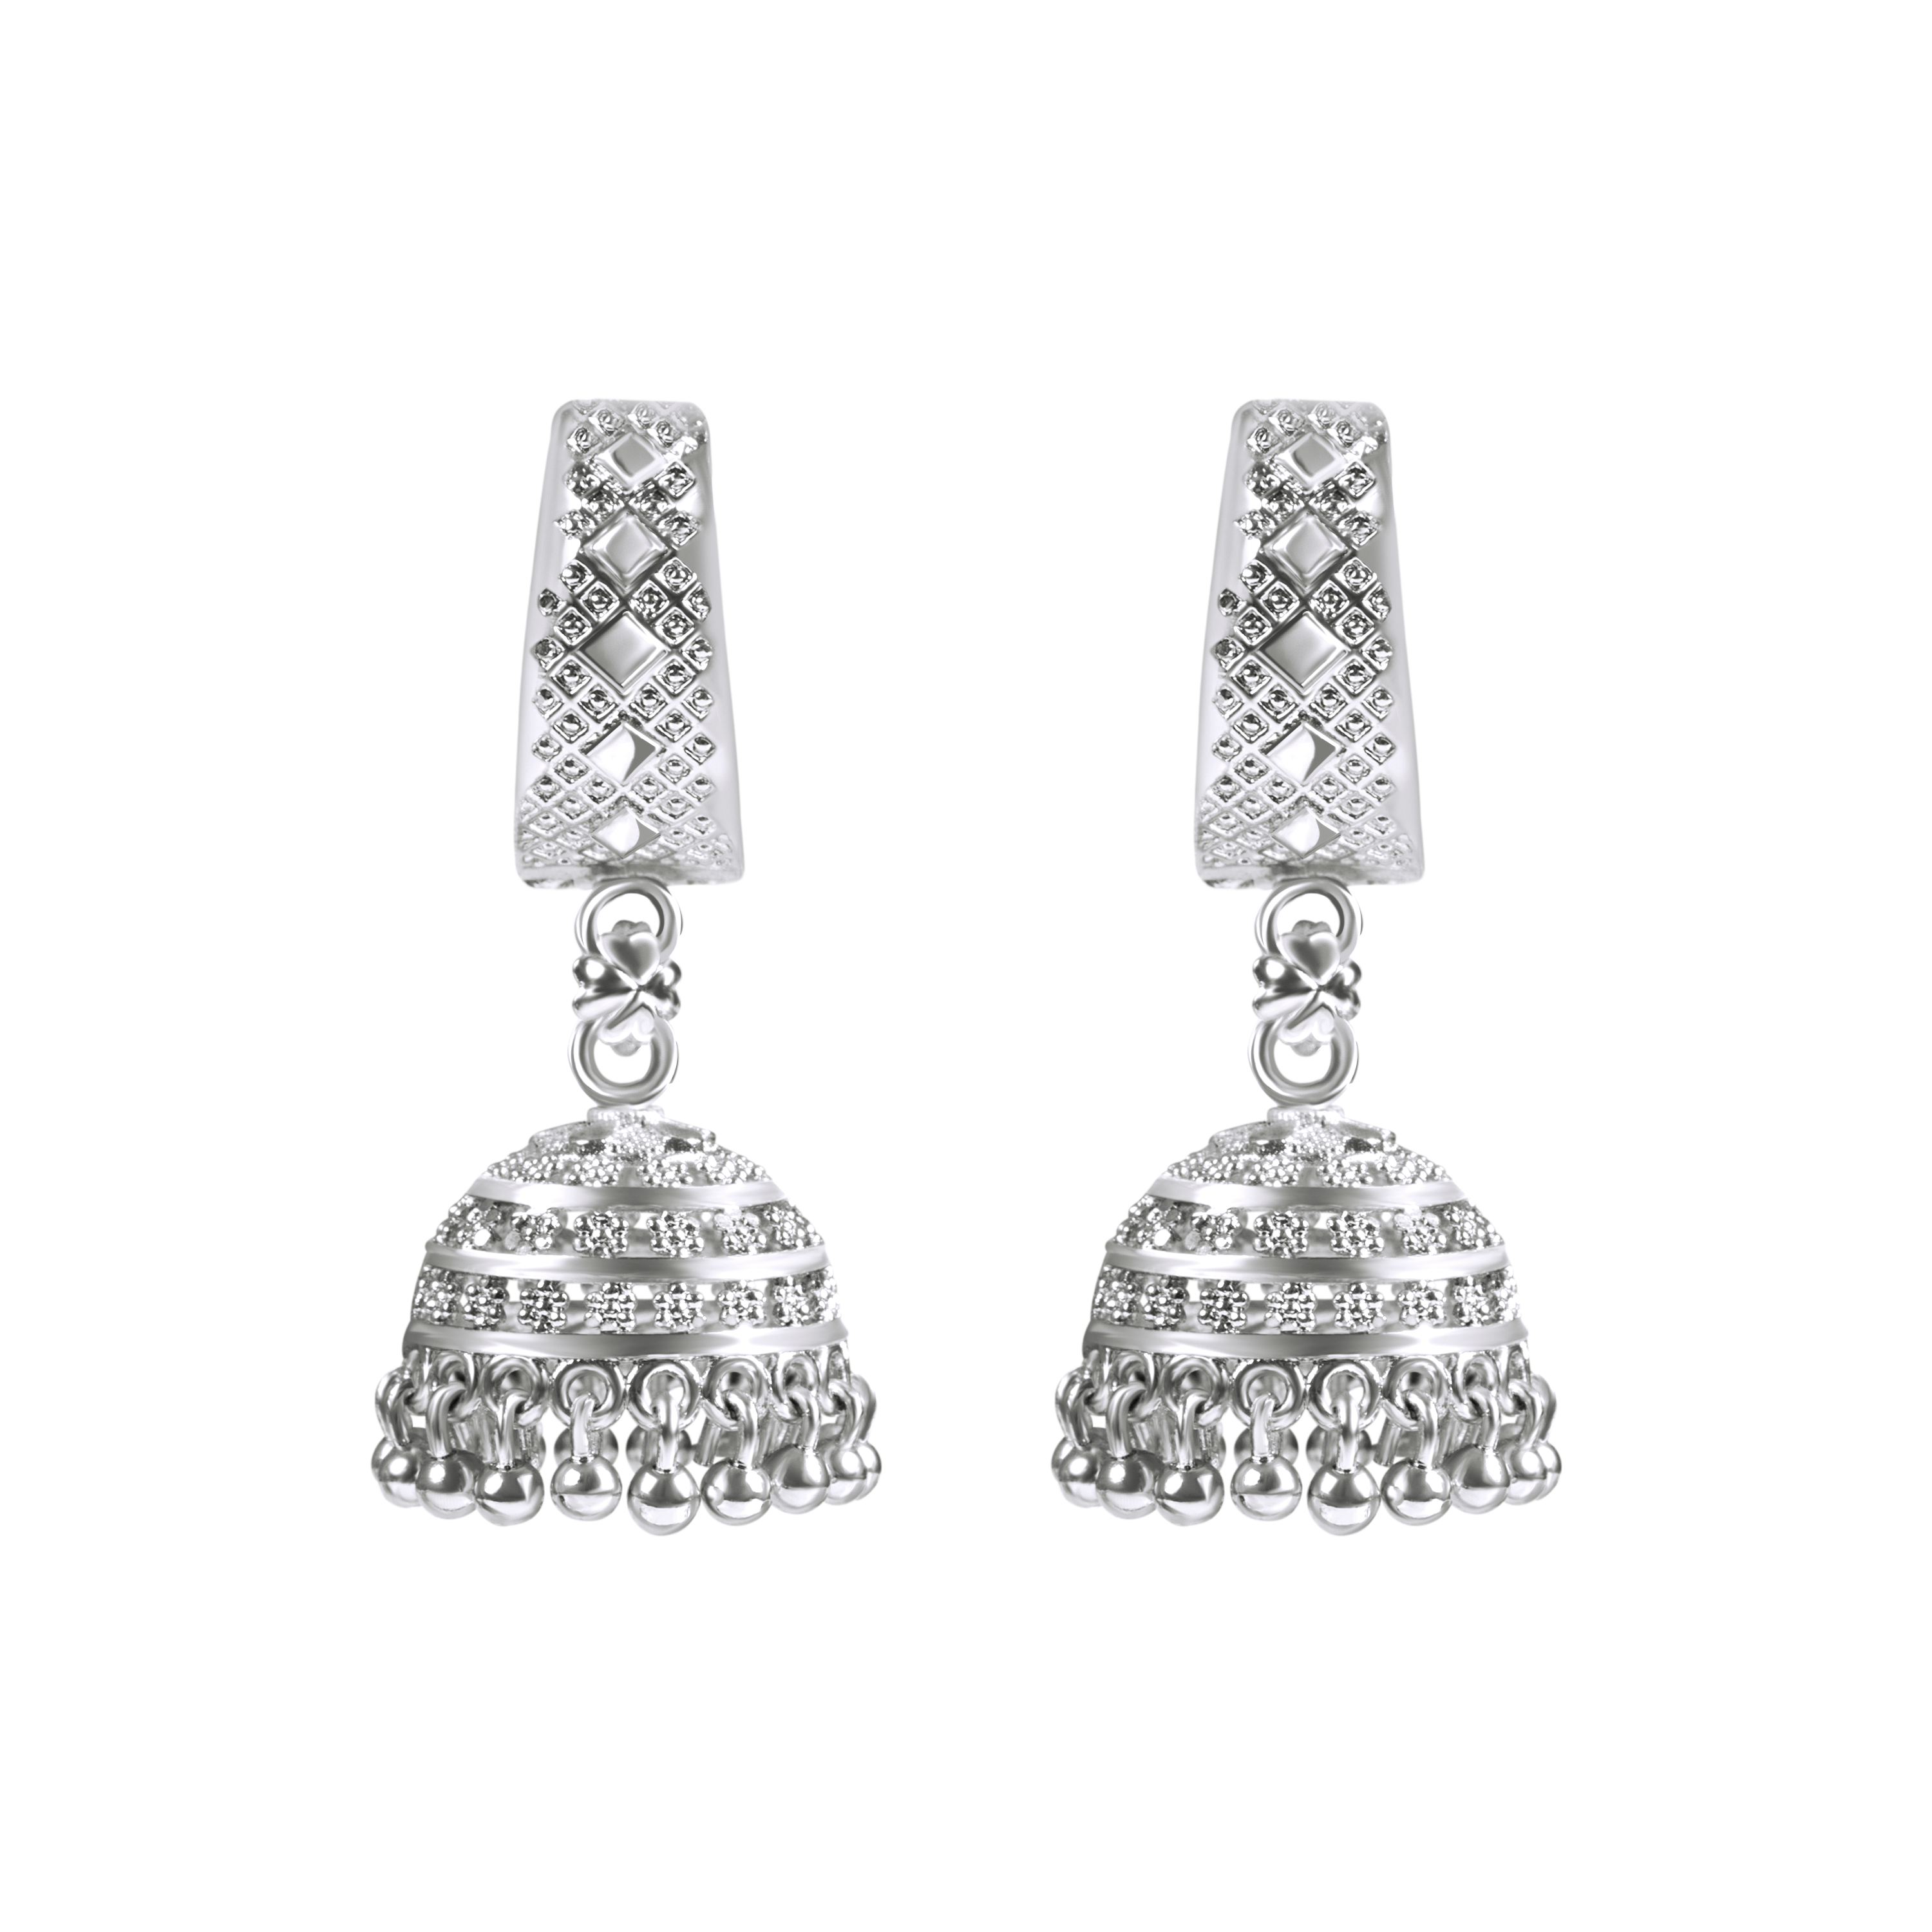 Silver Plated Temple Shaped Hair Chain Jhumka Earrings - ACCEI1551...